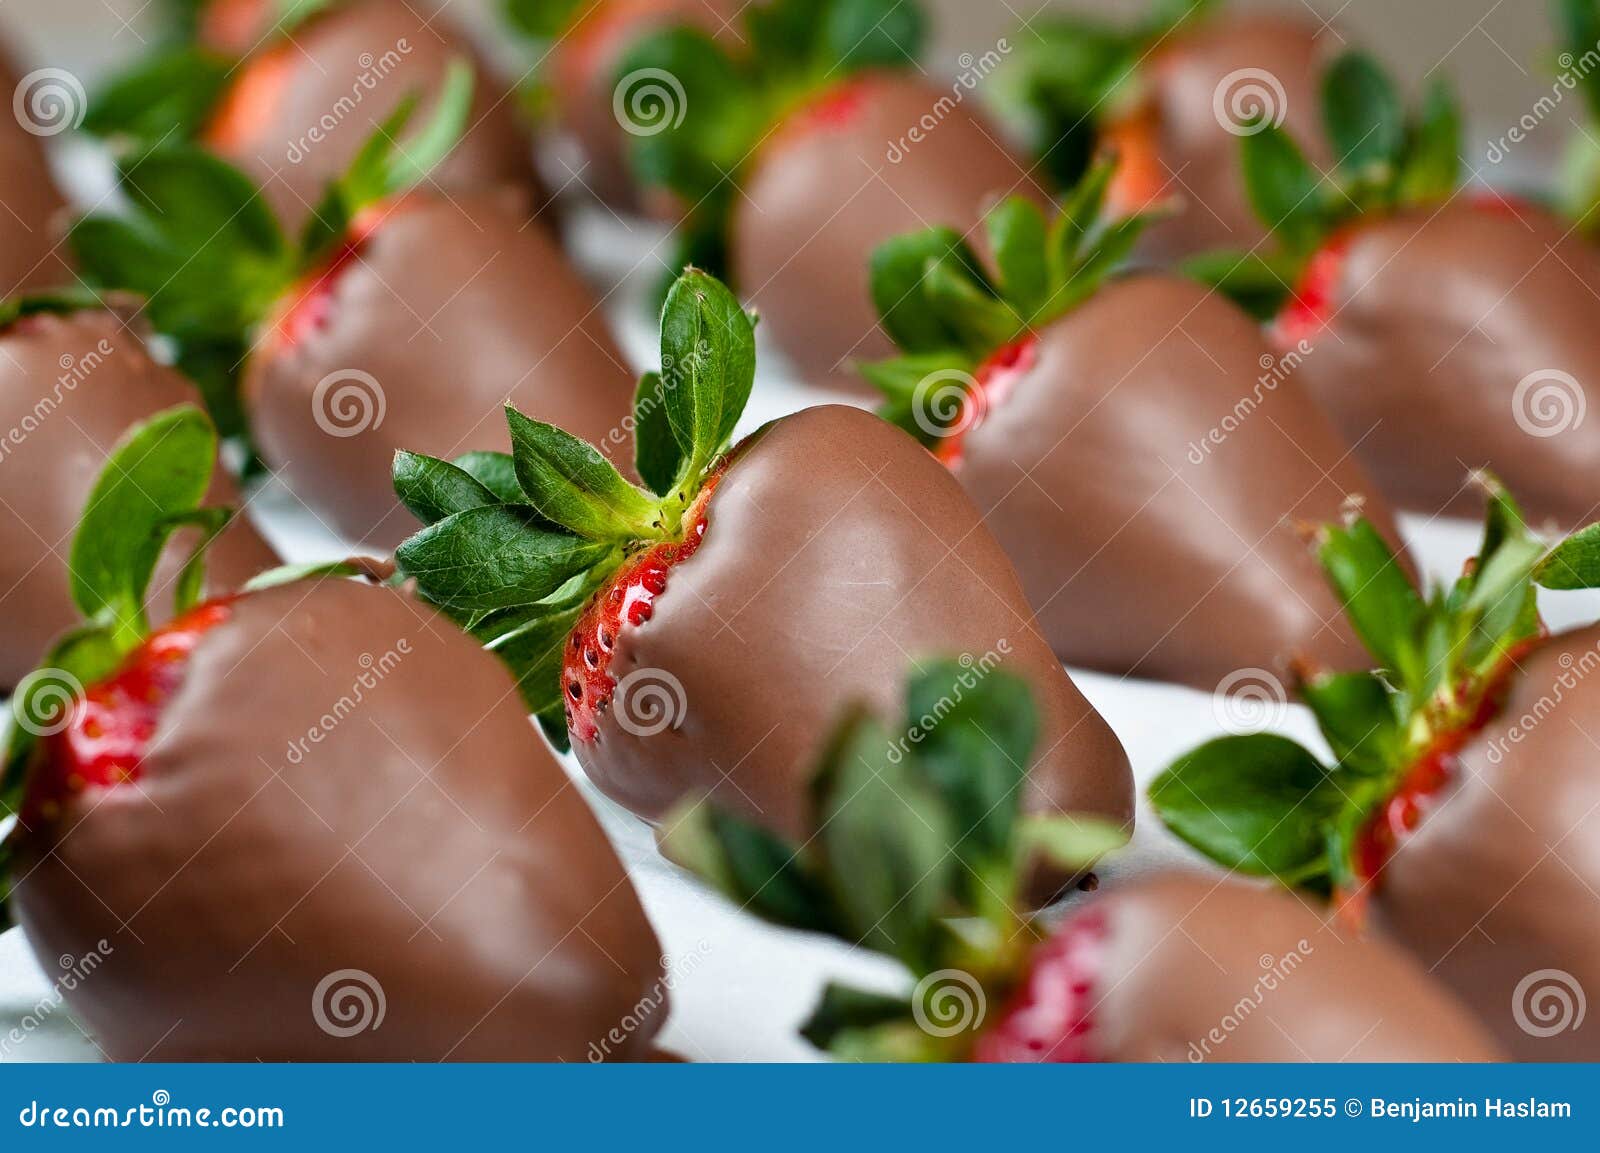 chocolate covered strawberries in rows